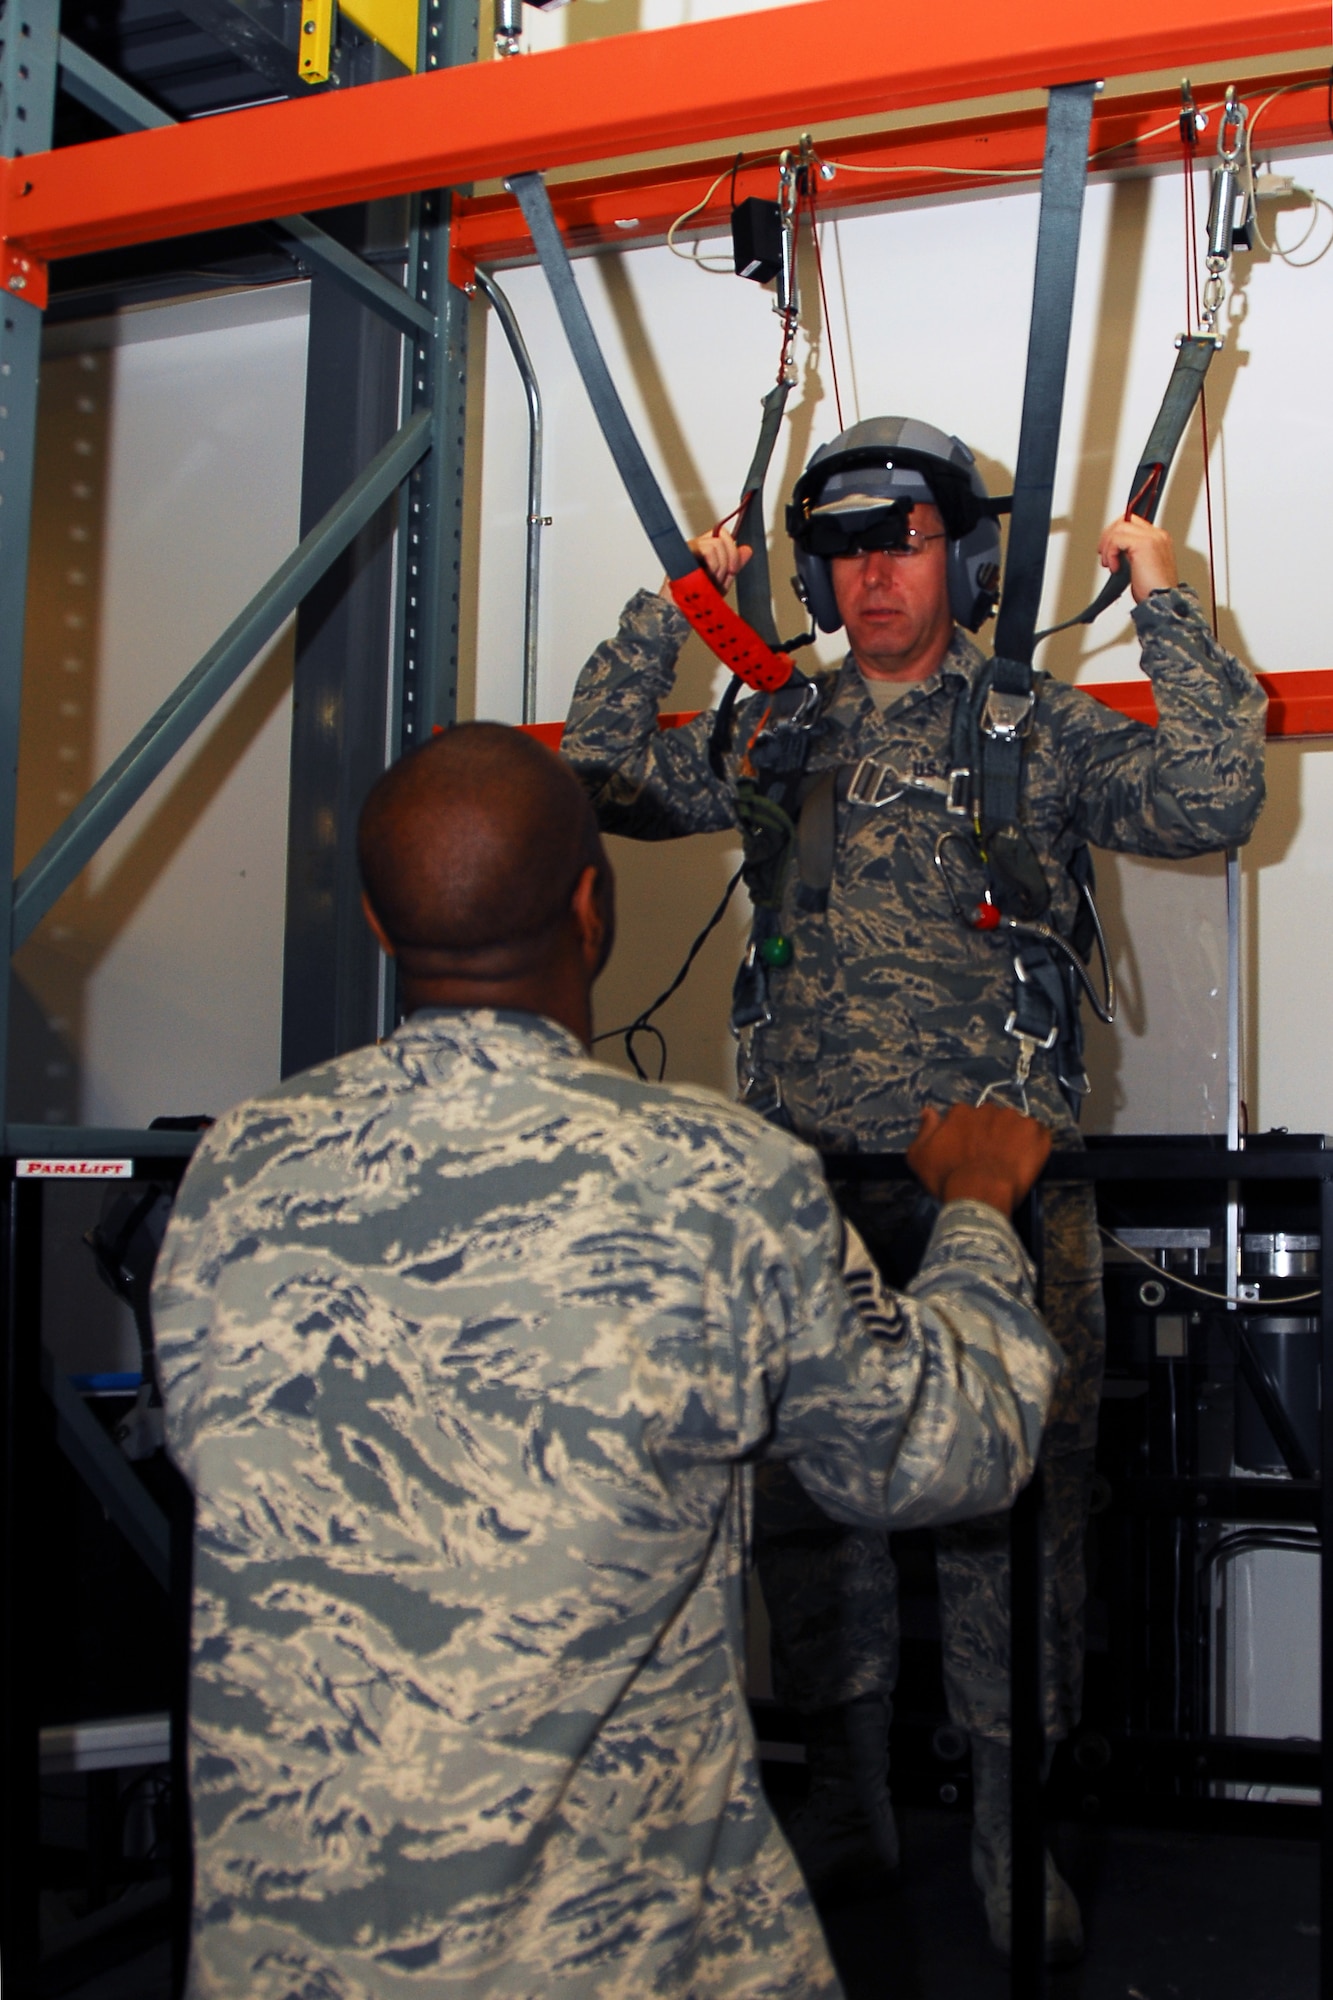 Chief Master Sergeant Steven Larwood, 22nd Air Force command chief, listens to Master Sergeant Ray Reynolds, 403rd Aircrew Flight Equipment supervisor, as he explains how to operate the parachute simulator. On Chief Larwood's visit to the 403rd Wing during April's Unit Training Assembly, he was able to meet with the many Airmen and learn about their individual jobs. (U.S. Air Force Photo by Senior Airman Tabitha Dupas)